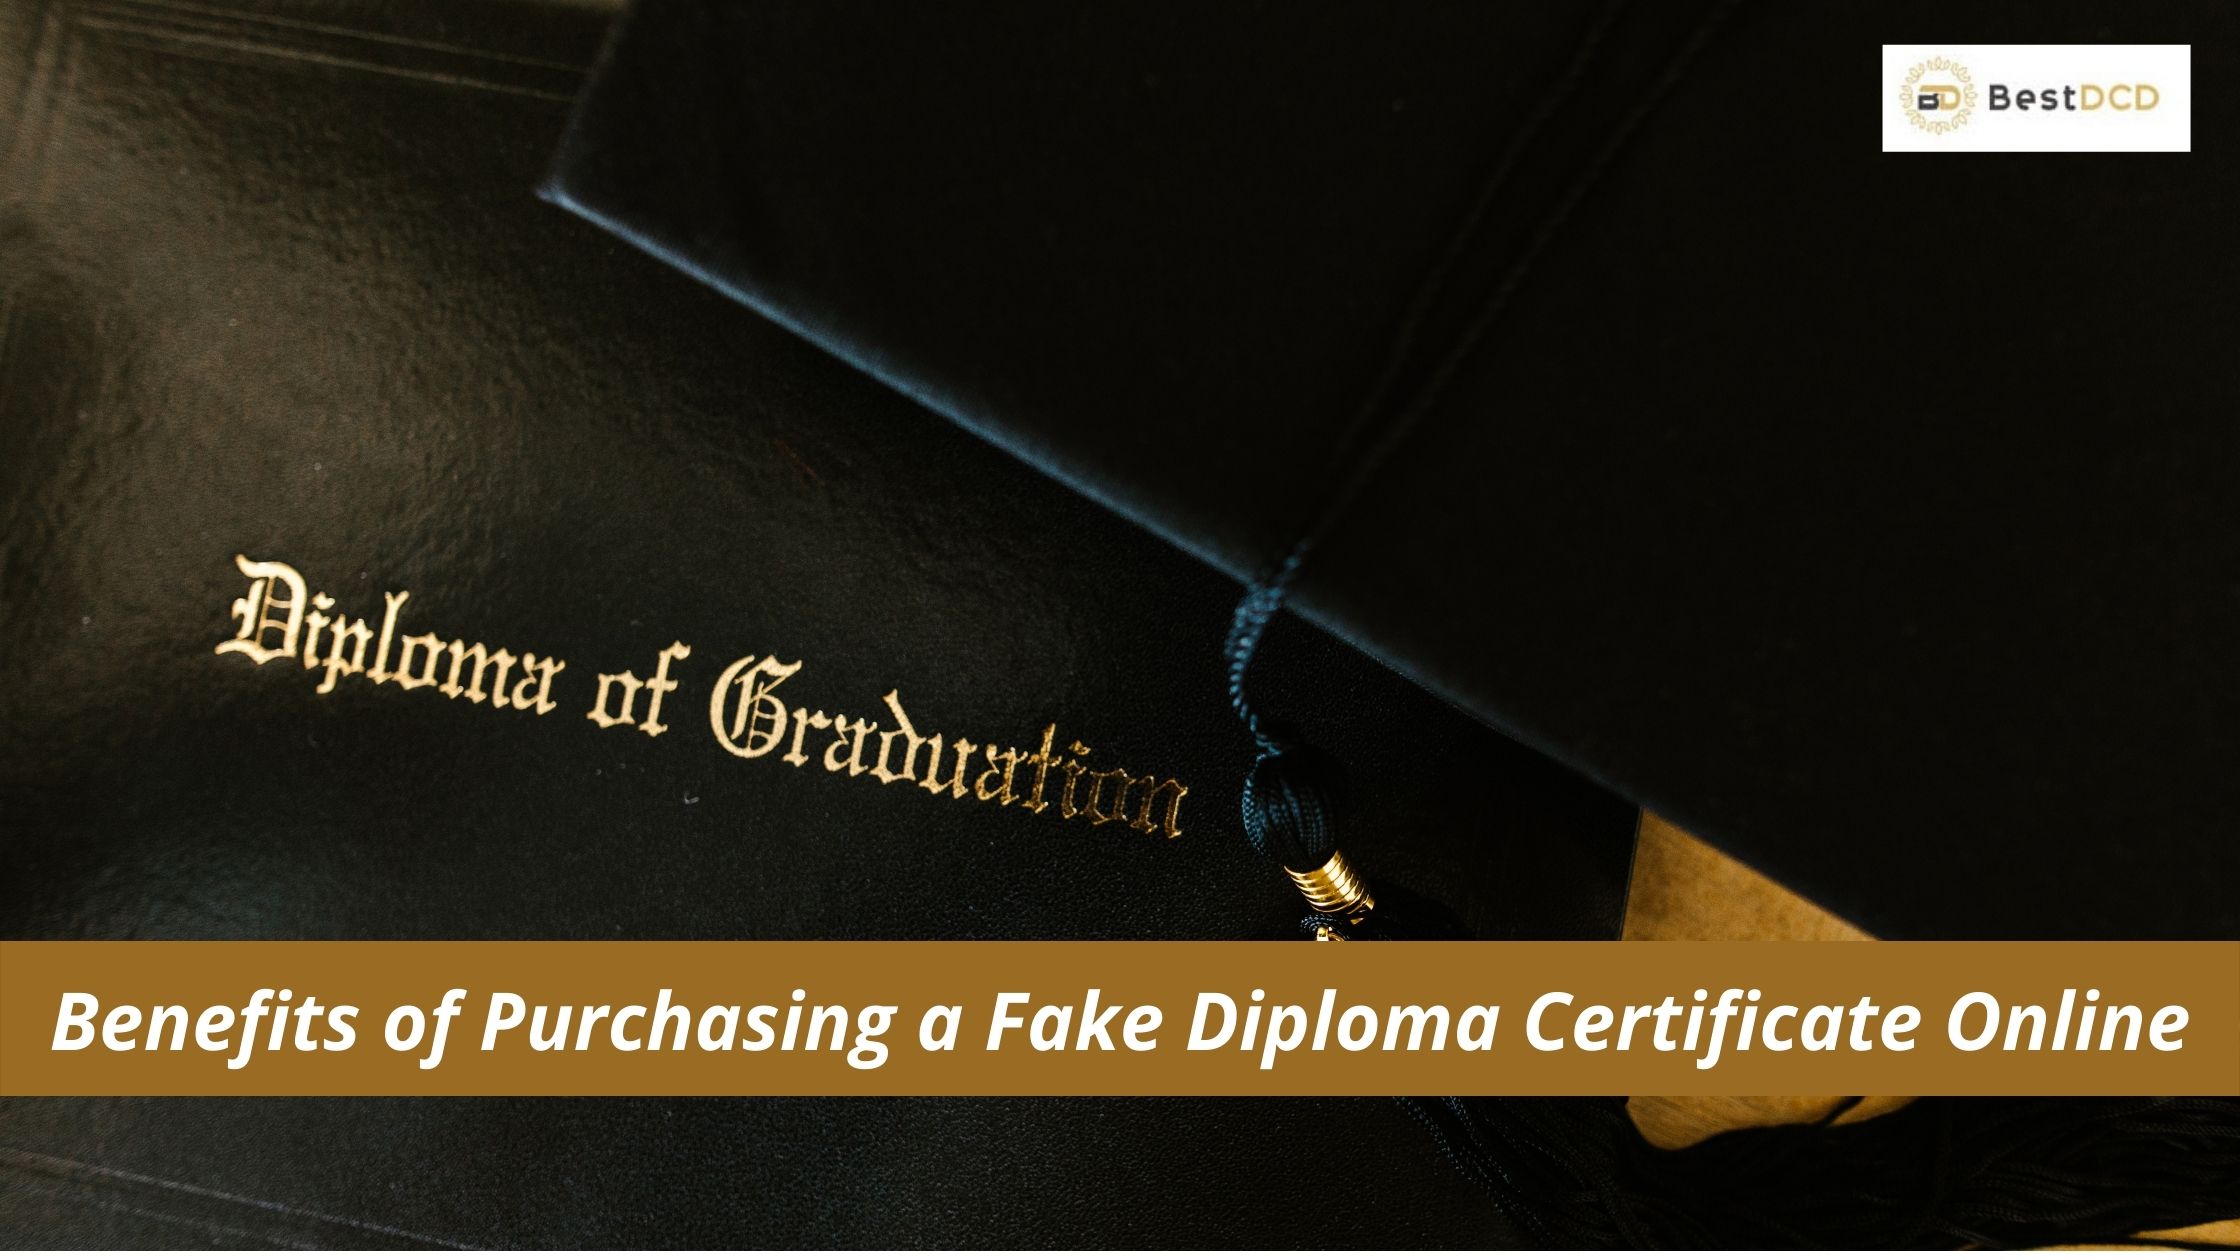 Benefits of Purchasing a Fake Diploma Certificate Online